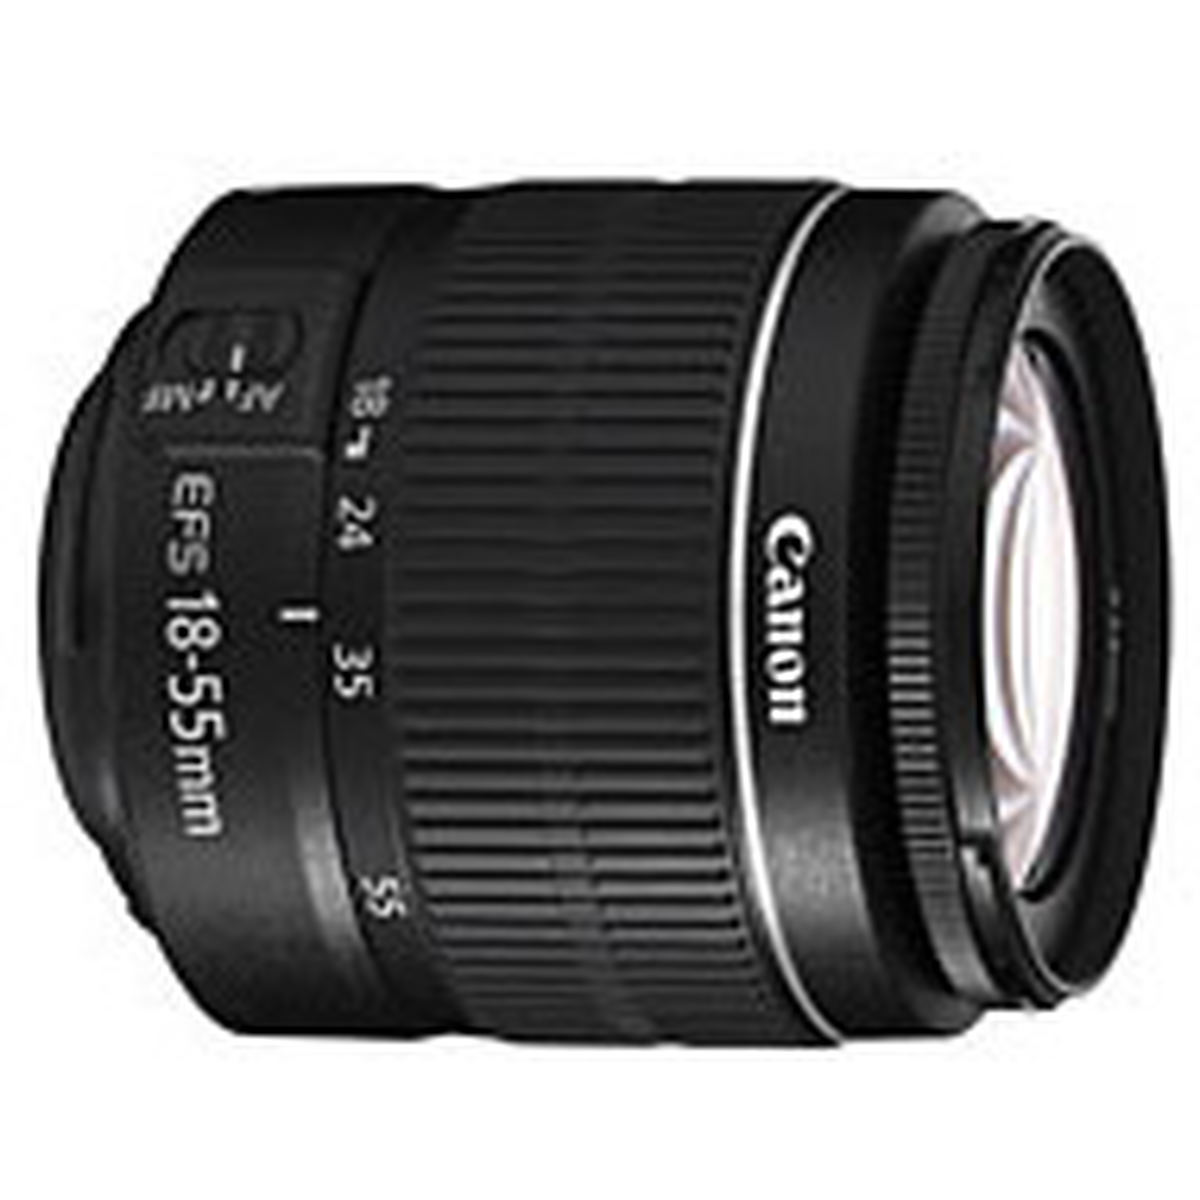 Canon EF-S 18-55mm f/3.5-5.6 III : Specifications and Opinions | JuzaPhoto